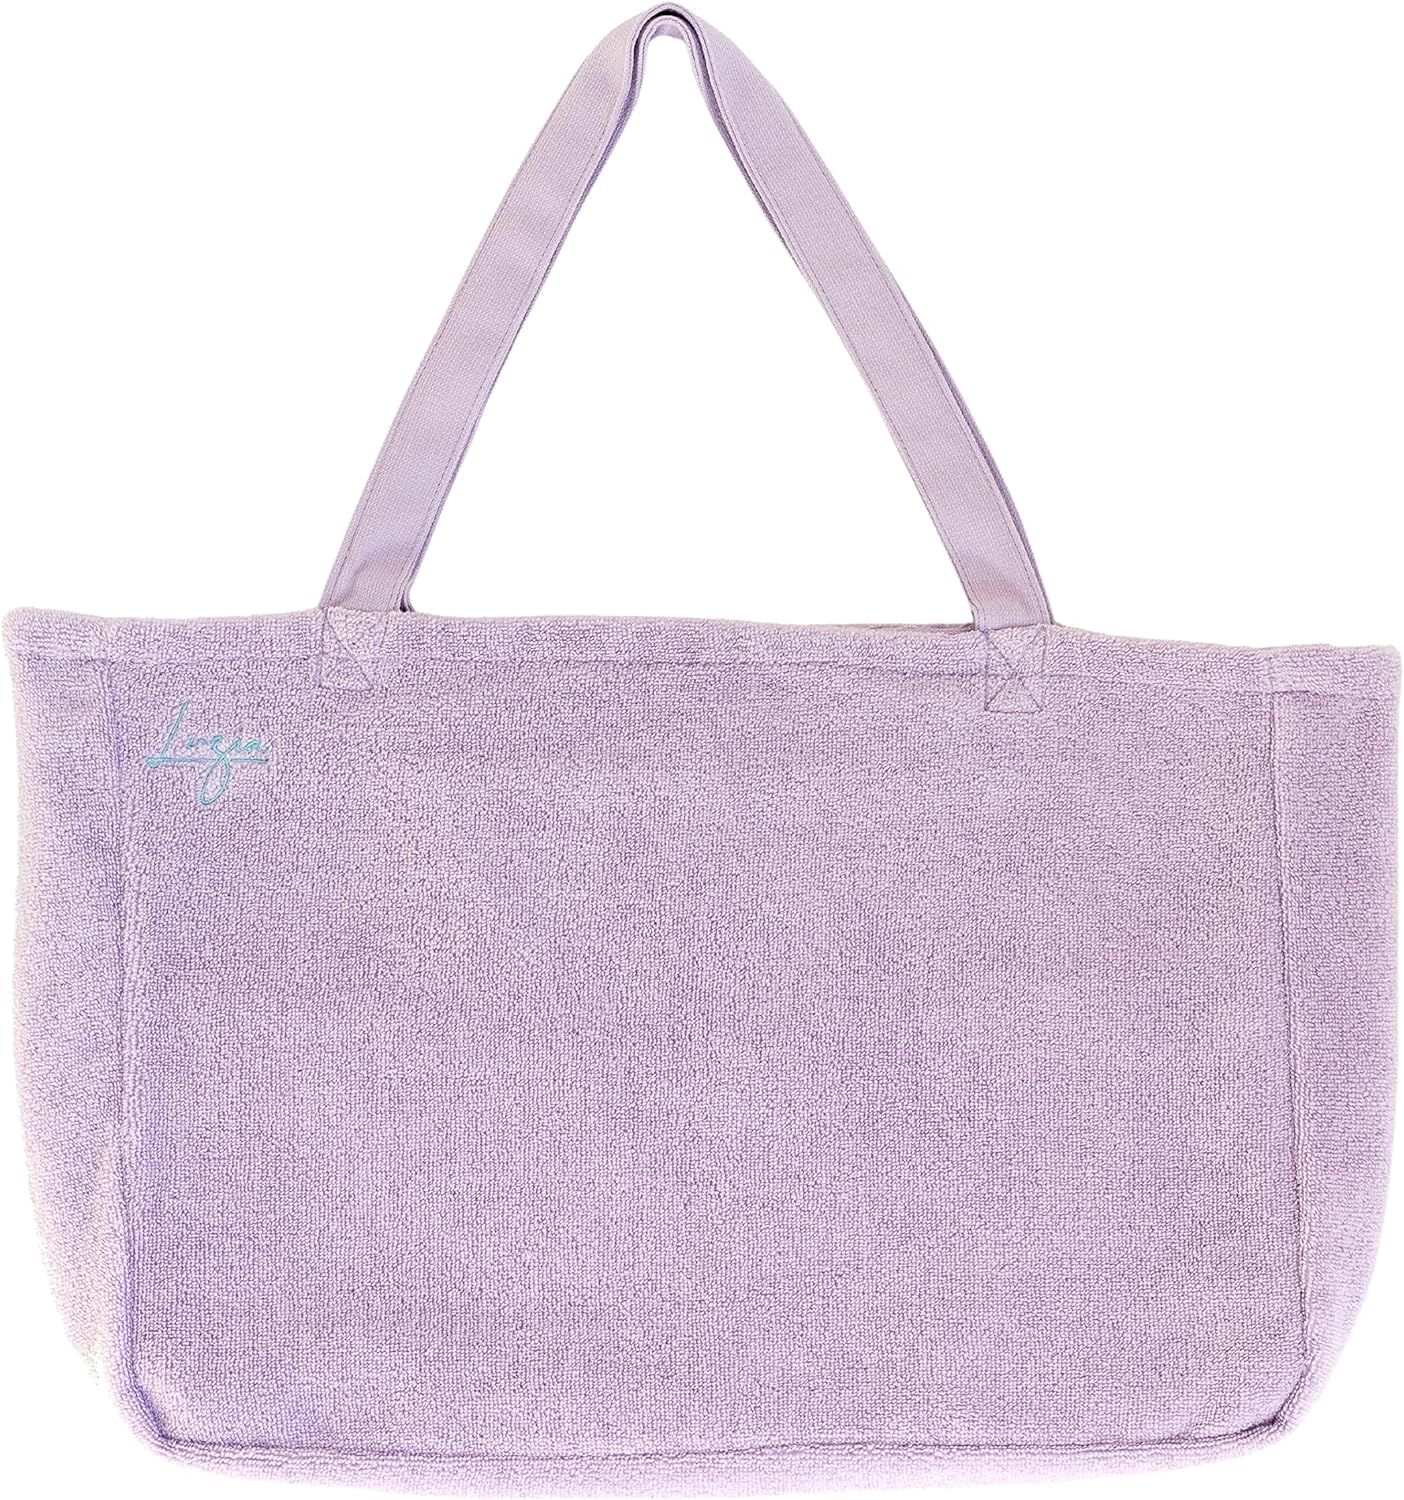 Luzia Beach and Pool Tote Bag - Extra Large, Reversible, Shoulder Bag - Made of Luxuriously Soft Pre | Amazon (US)